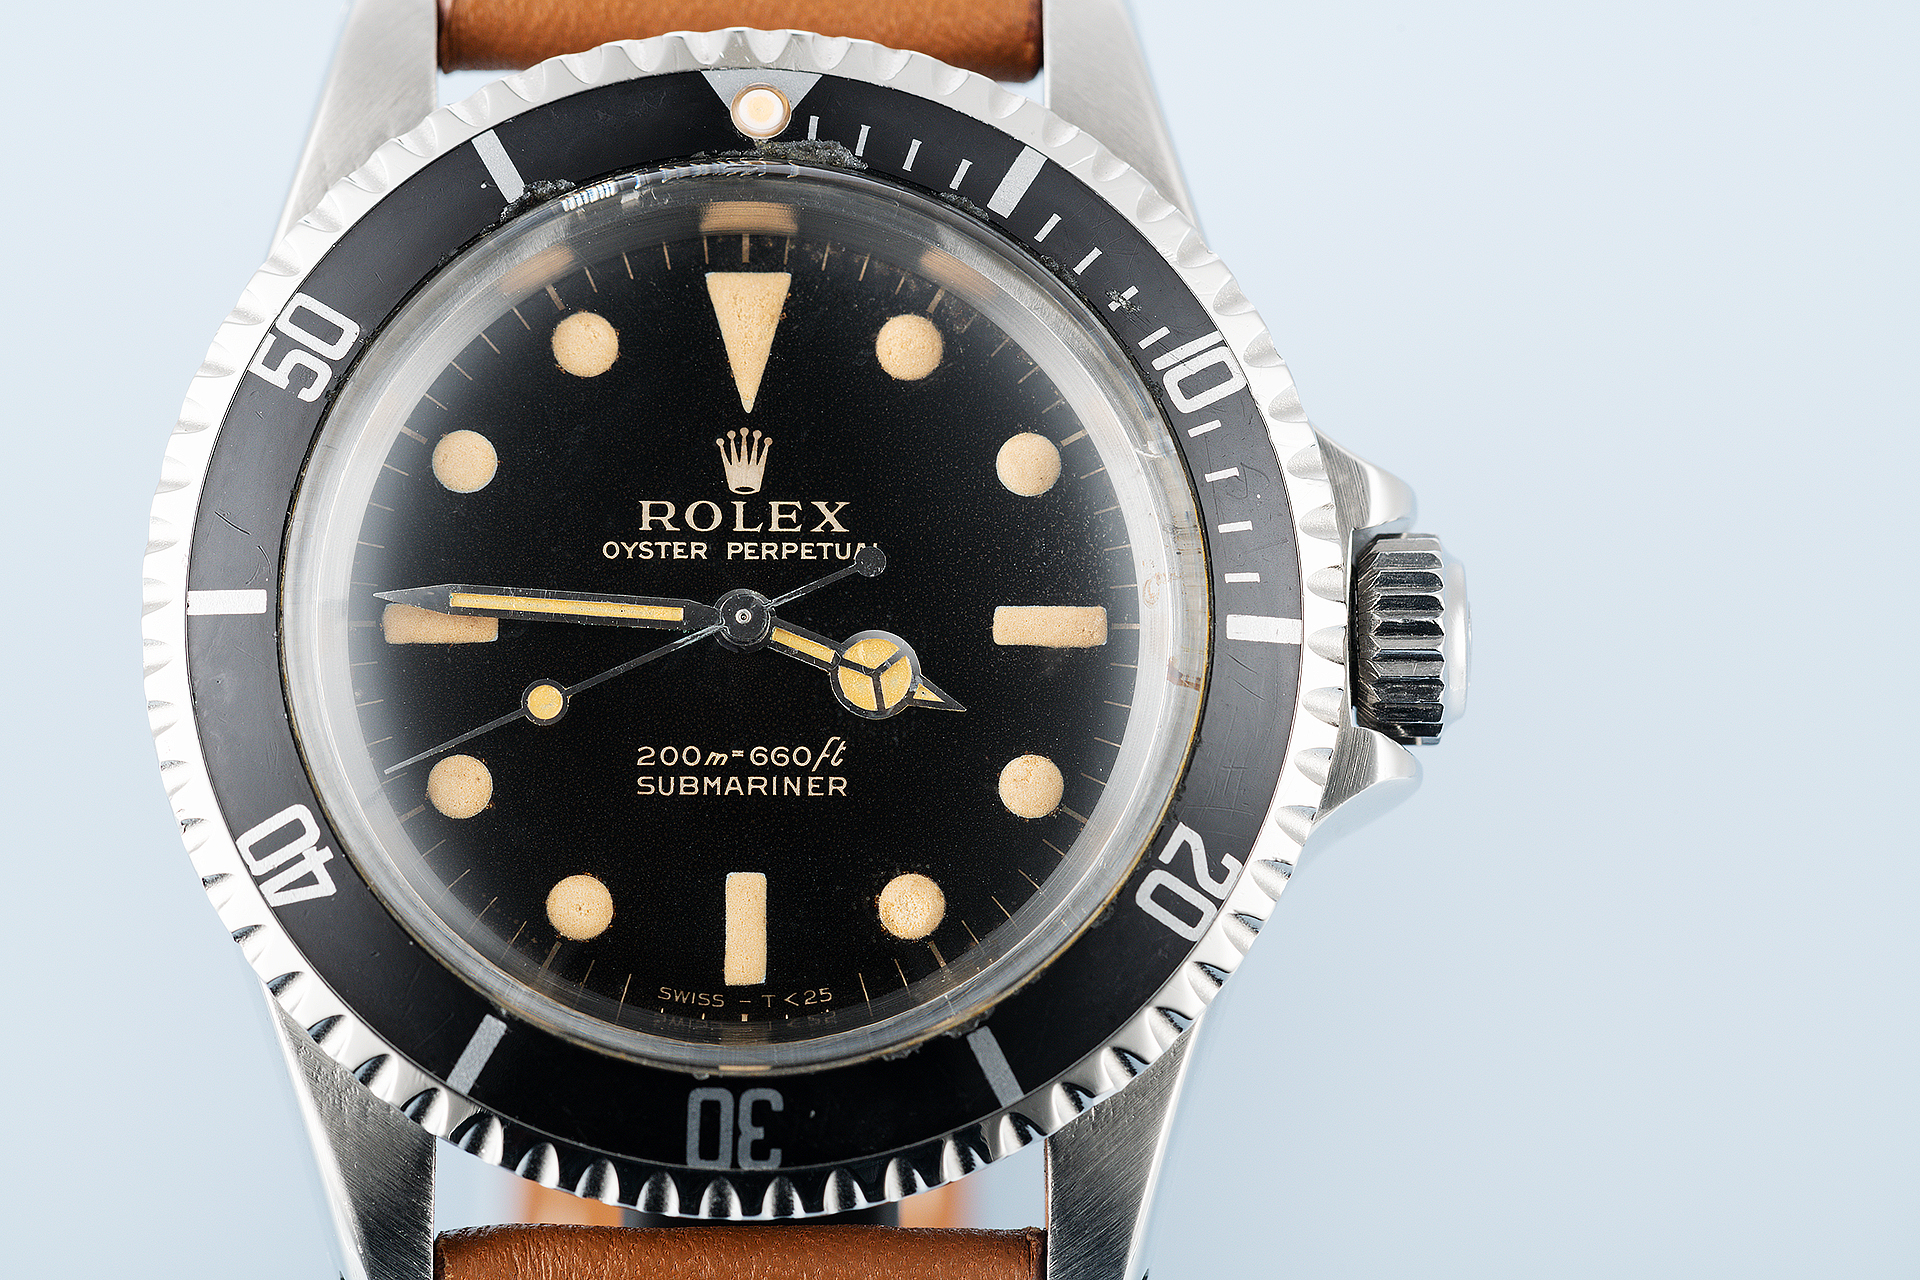 Rolex Watches ref 5513 Rare Gilt 'Metres First' Dial | Watch Club